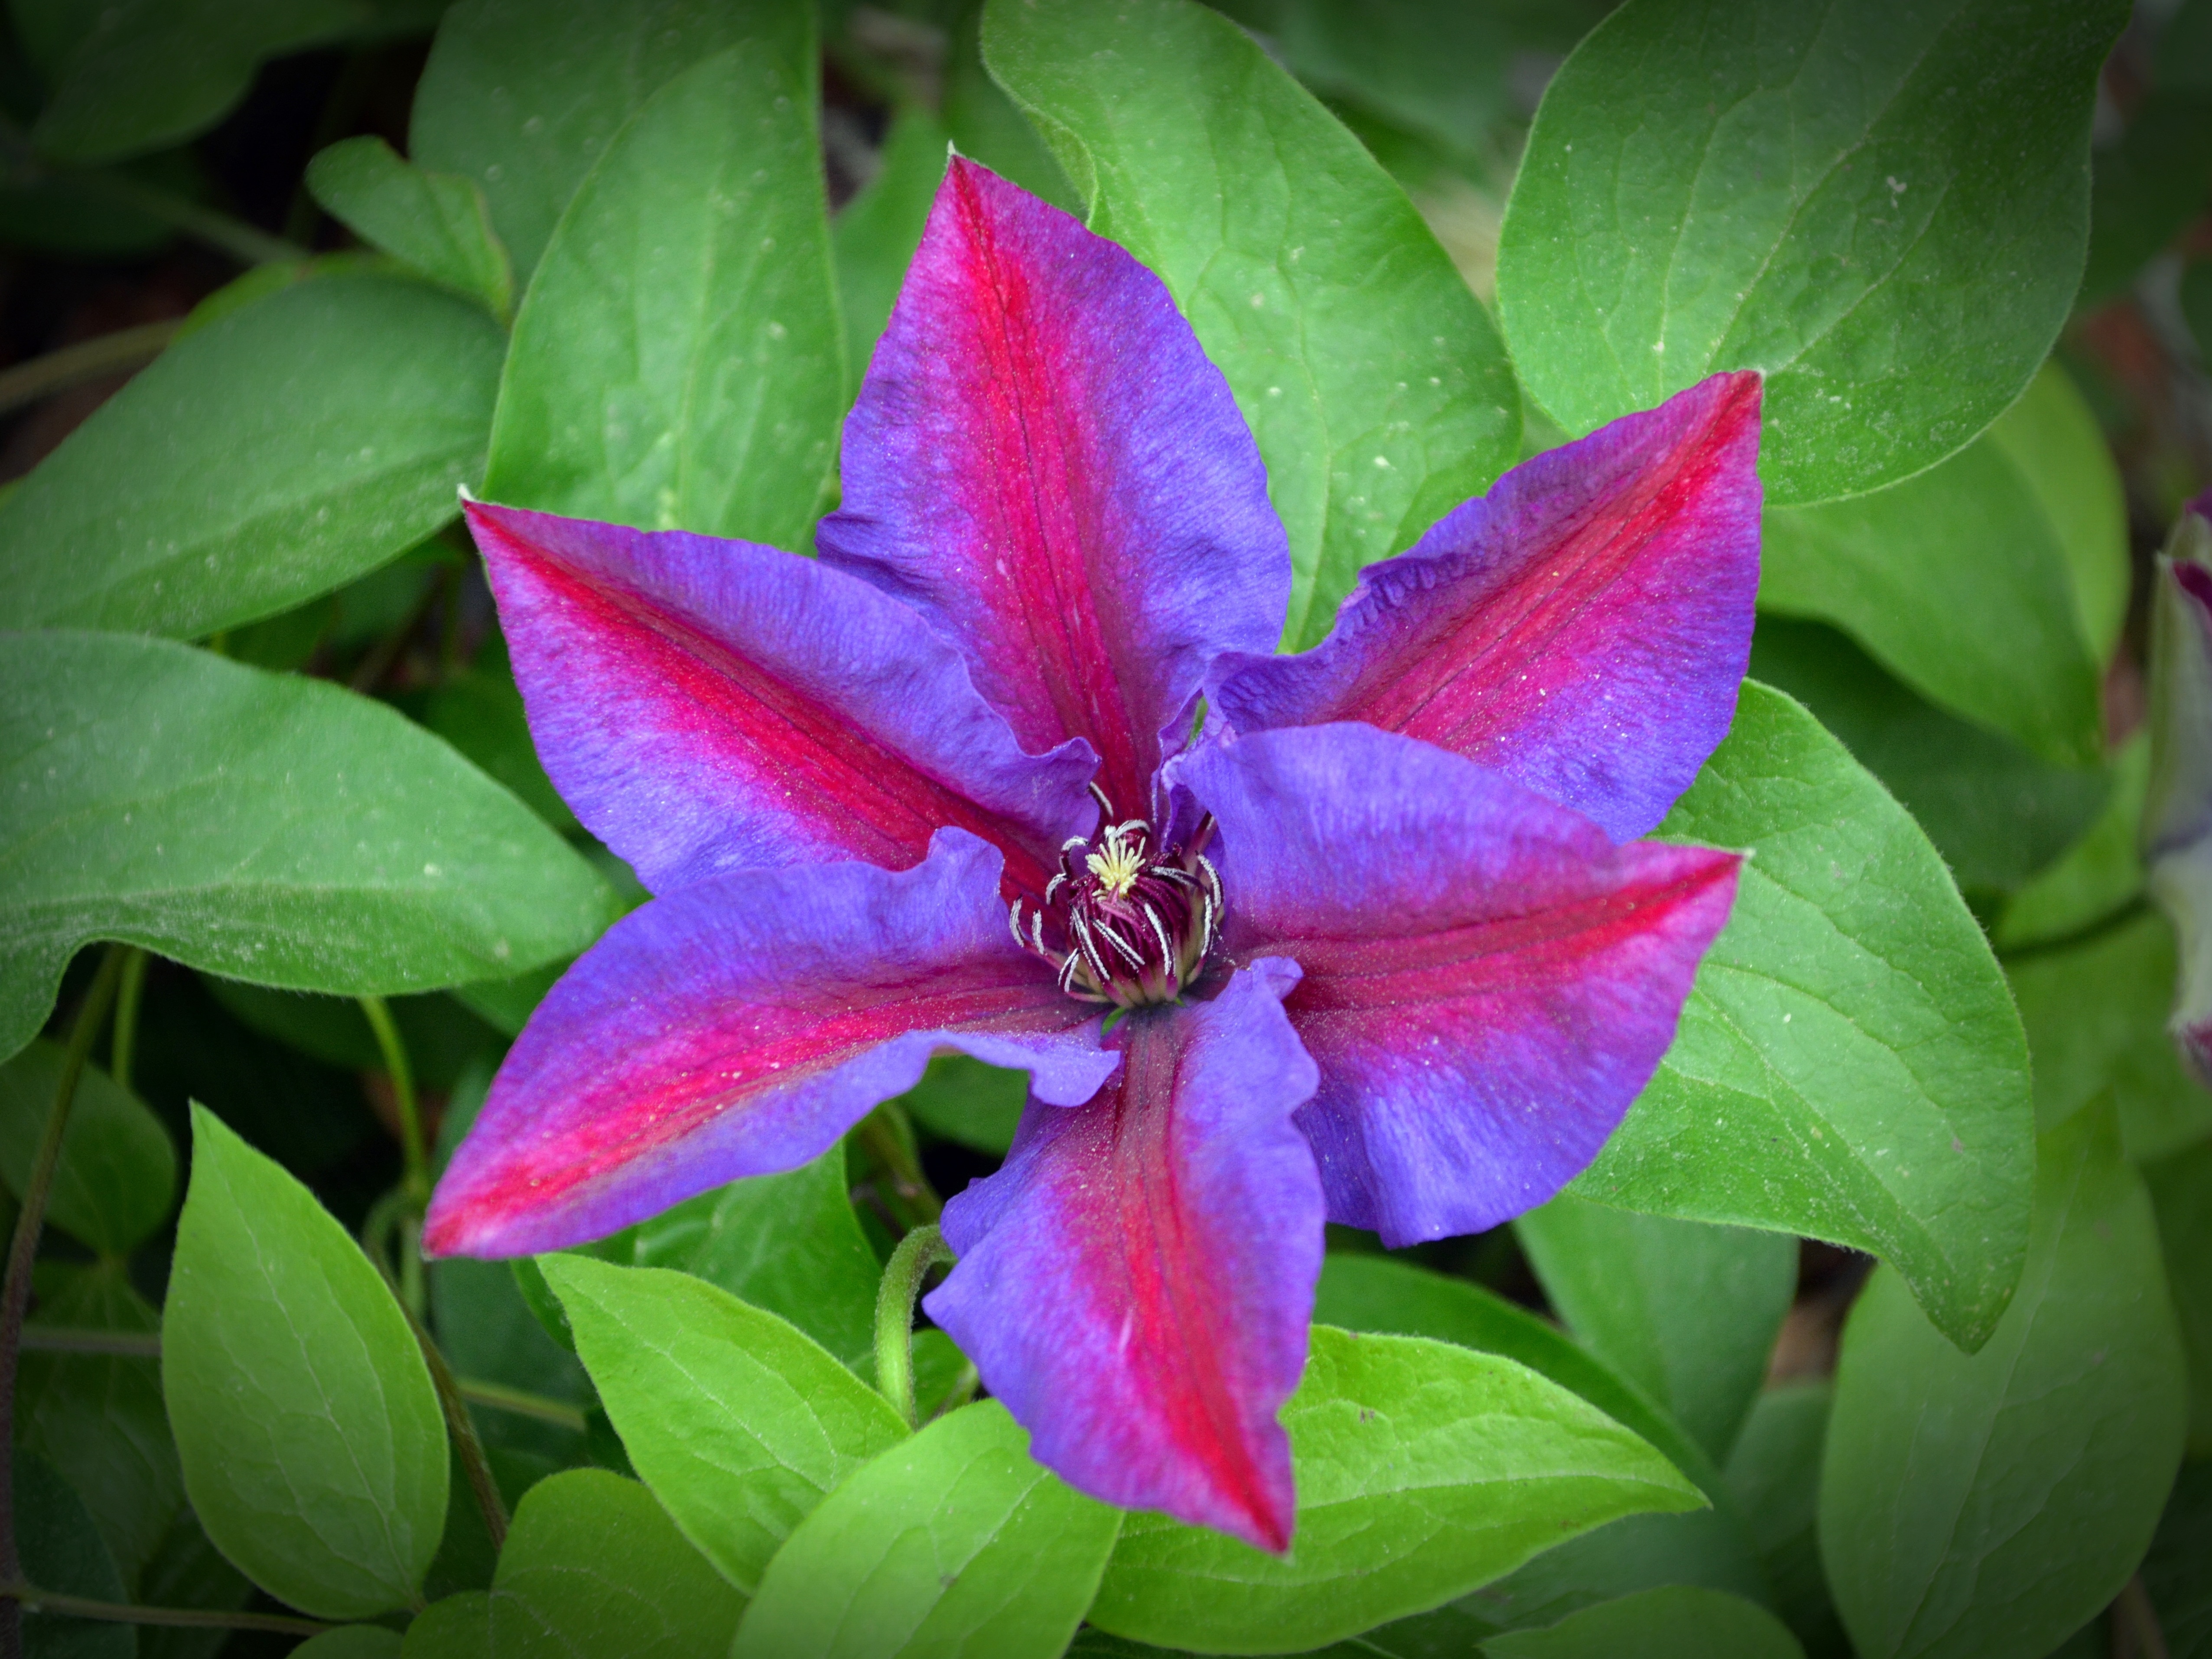 purple and red 6 petaled flower